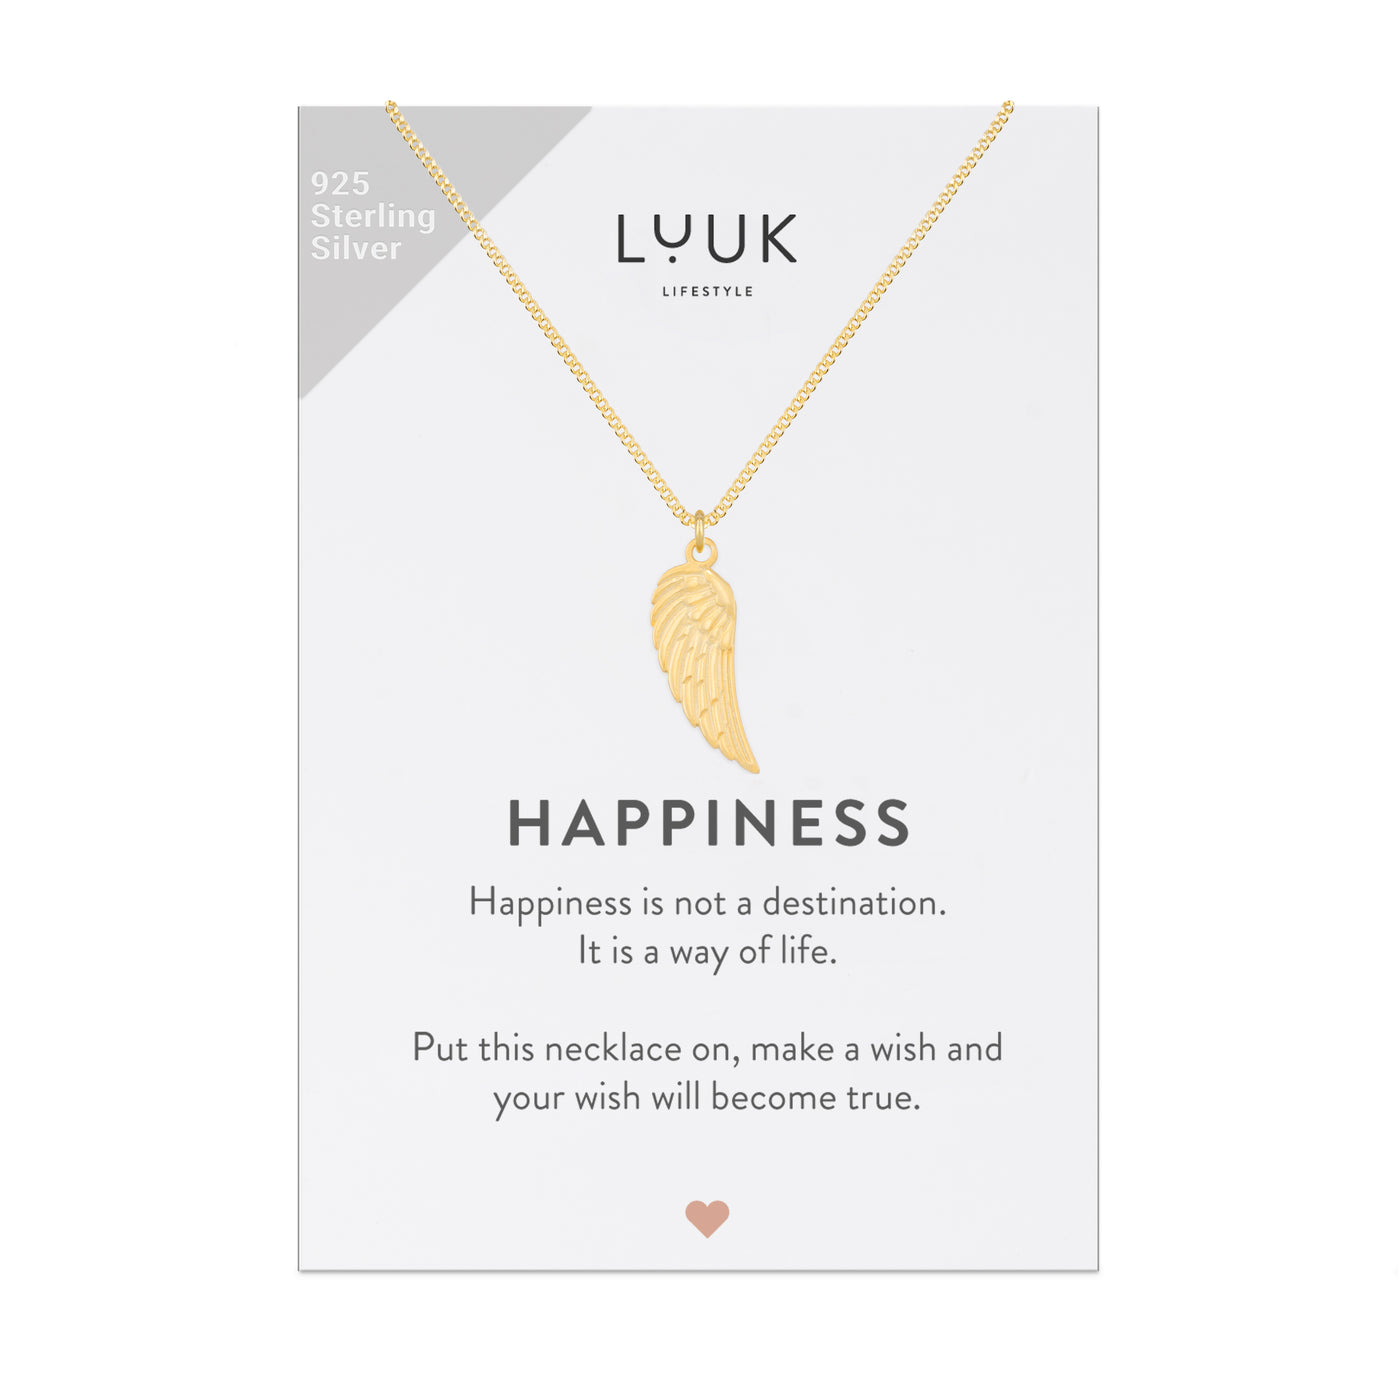 Sterling silver necklace with angel wing pendant and Happiness greeting card